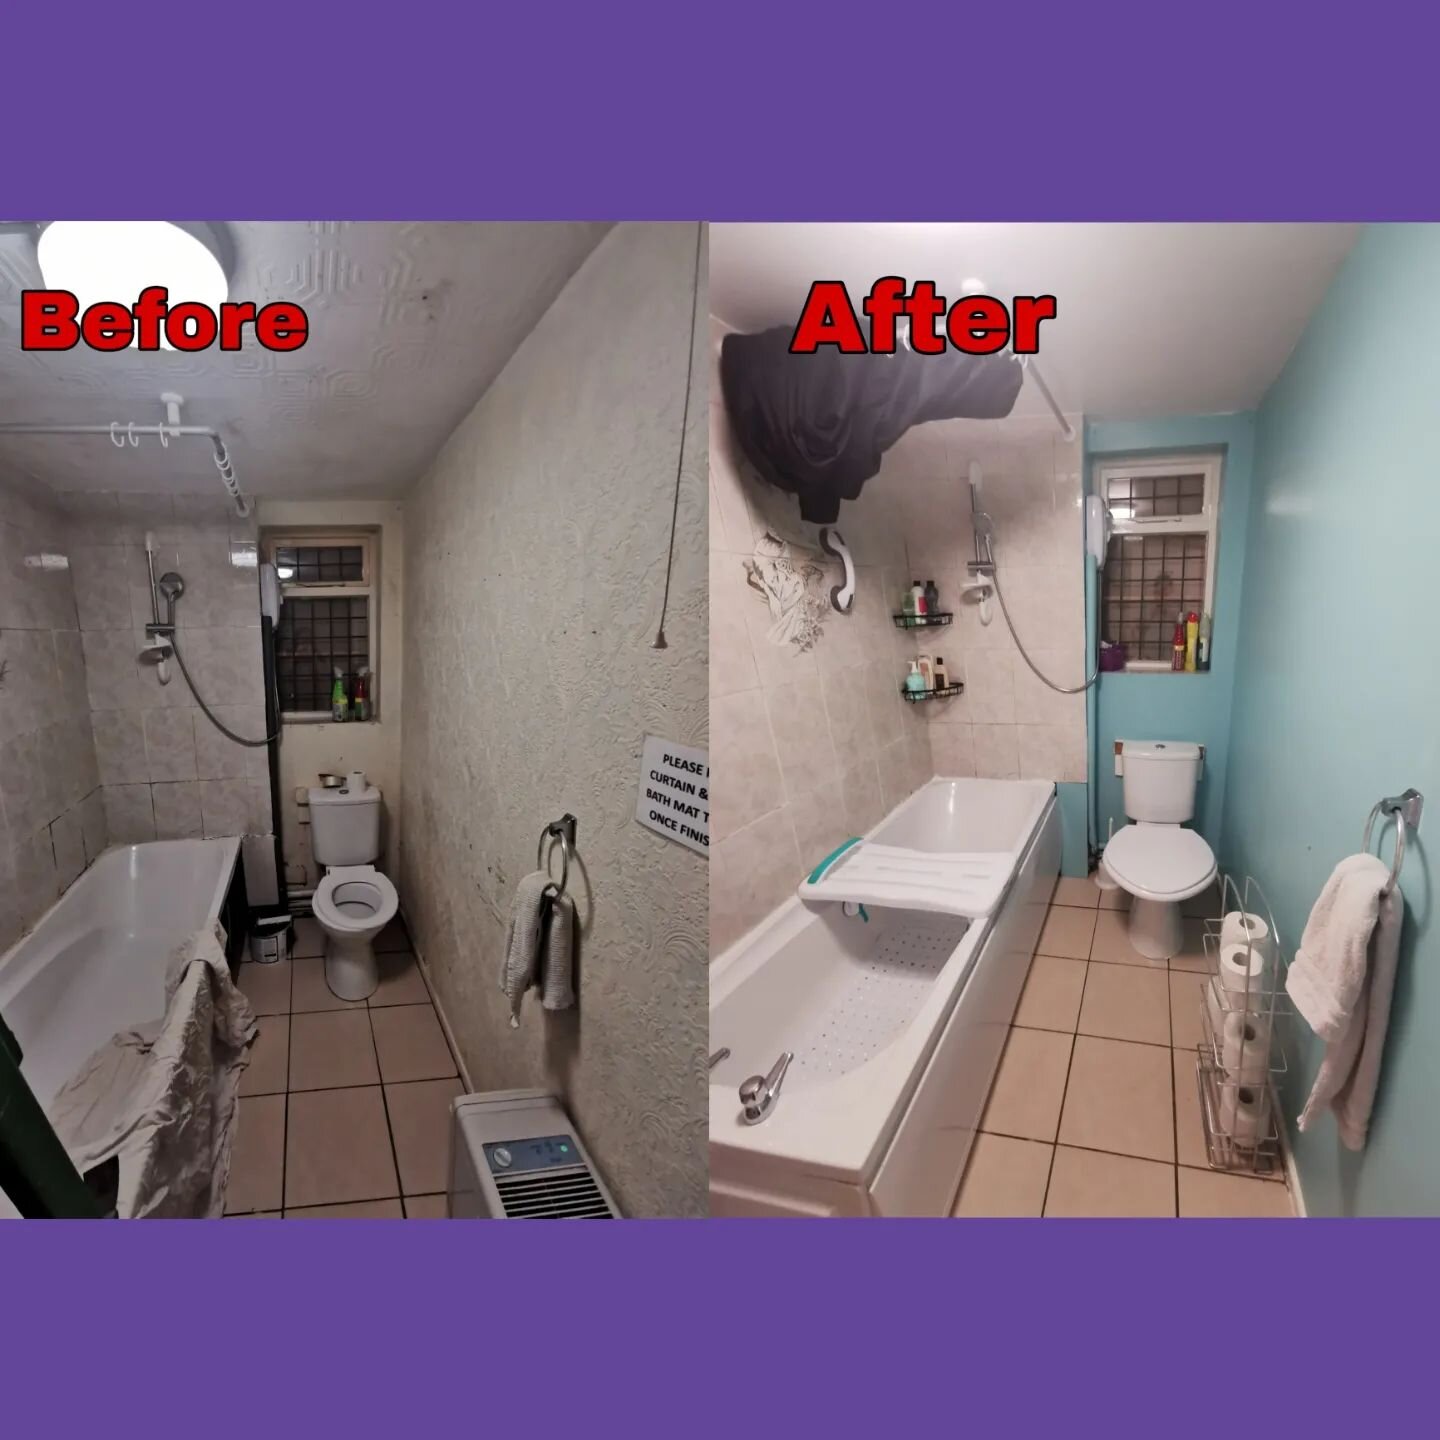 Over the past few weeks we have redecorated our downstairs bathroom and made it more accessible! 
Living without a landlord means we can make make improvements to our rooms and put our members needs first.
.
.
.
.
#bshc #coophousing #coopliving #stud